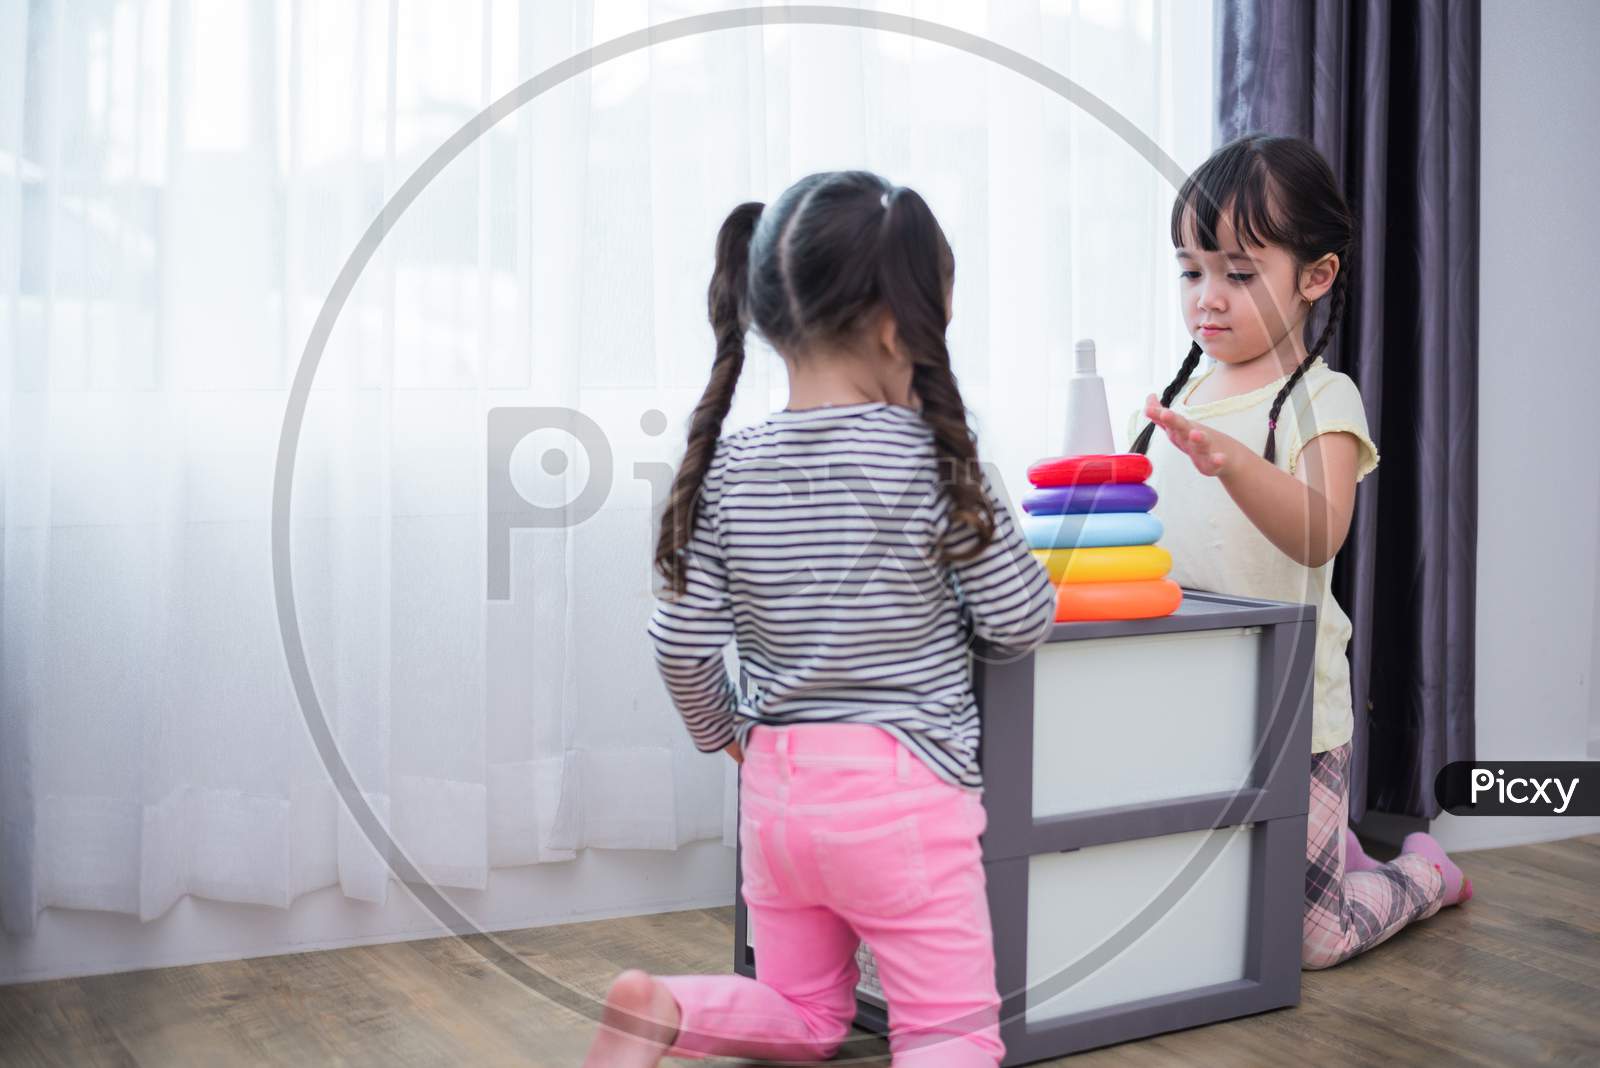 Two Little Girls Playing Small Toy Balls In Home Together. Education And Happiness Lifestyle Concept. Funny Learning And Children Development Theme. Group Of Kids